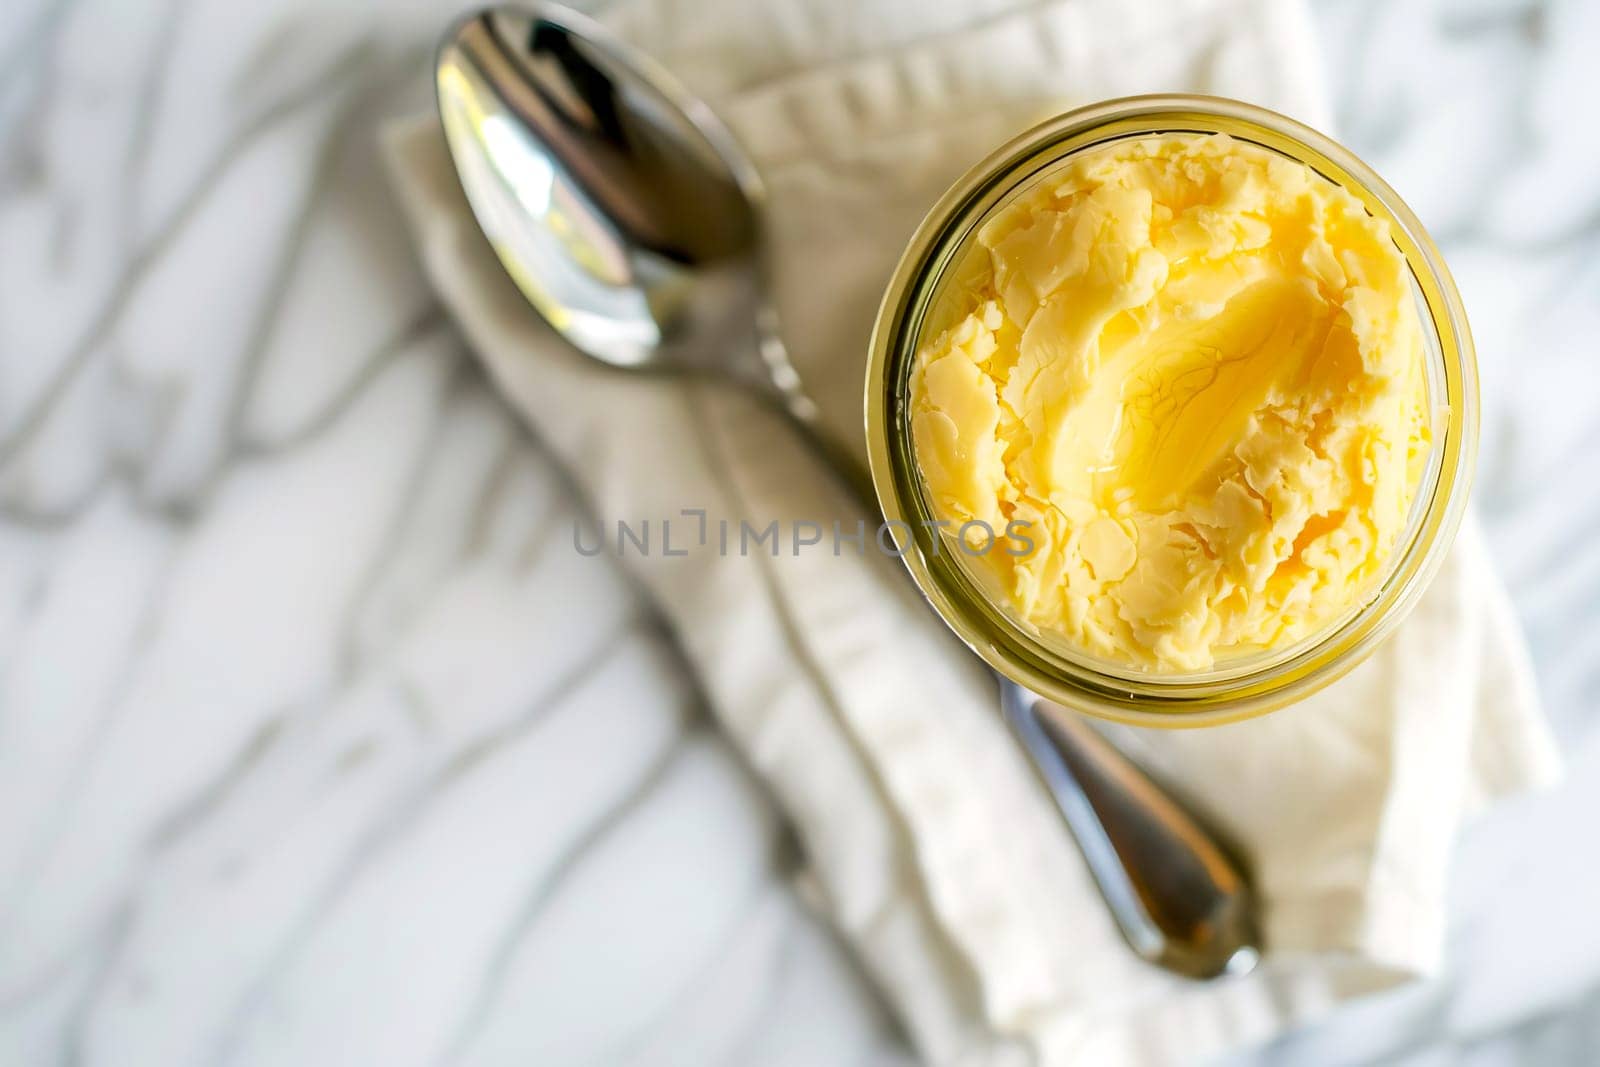 Top view, jar of ghee on a linen napkin with a spoon, light background.